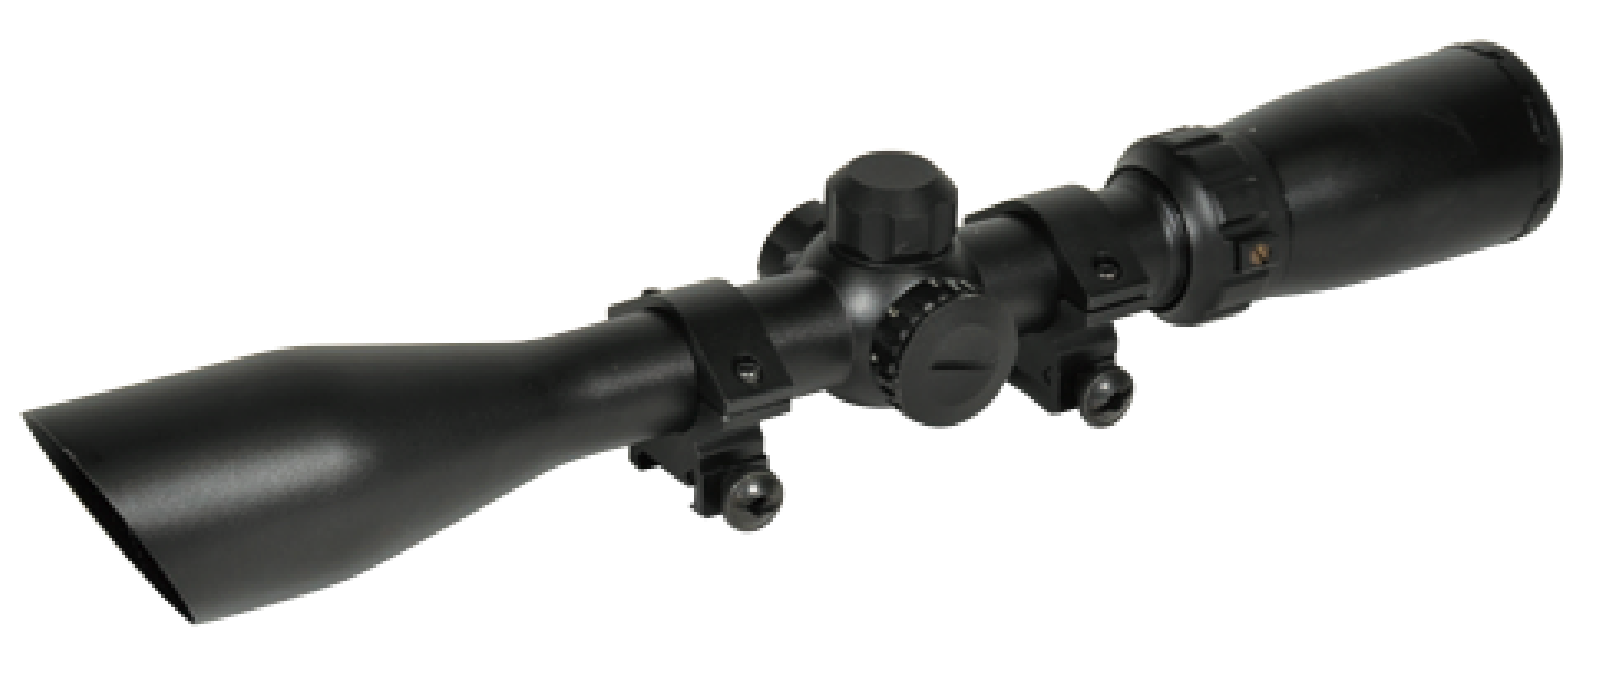 SWISS ARMS Aiming Scope 3-9 x 40 Blue reticle with rings/C24